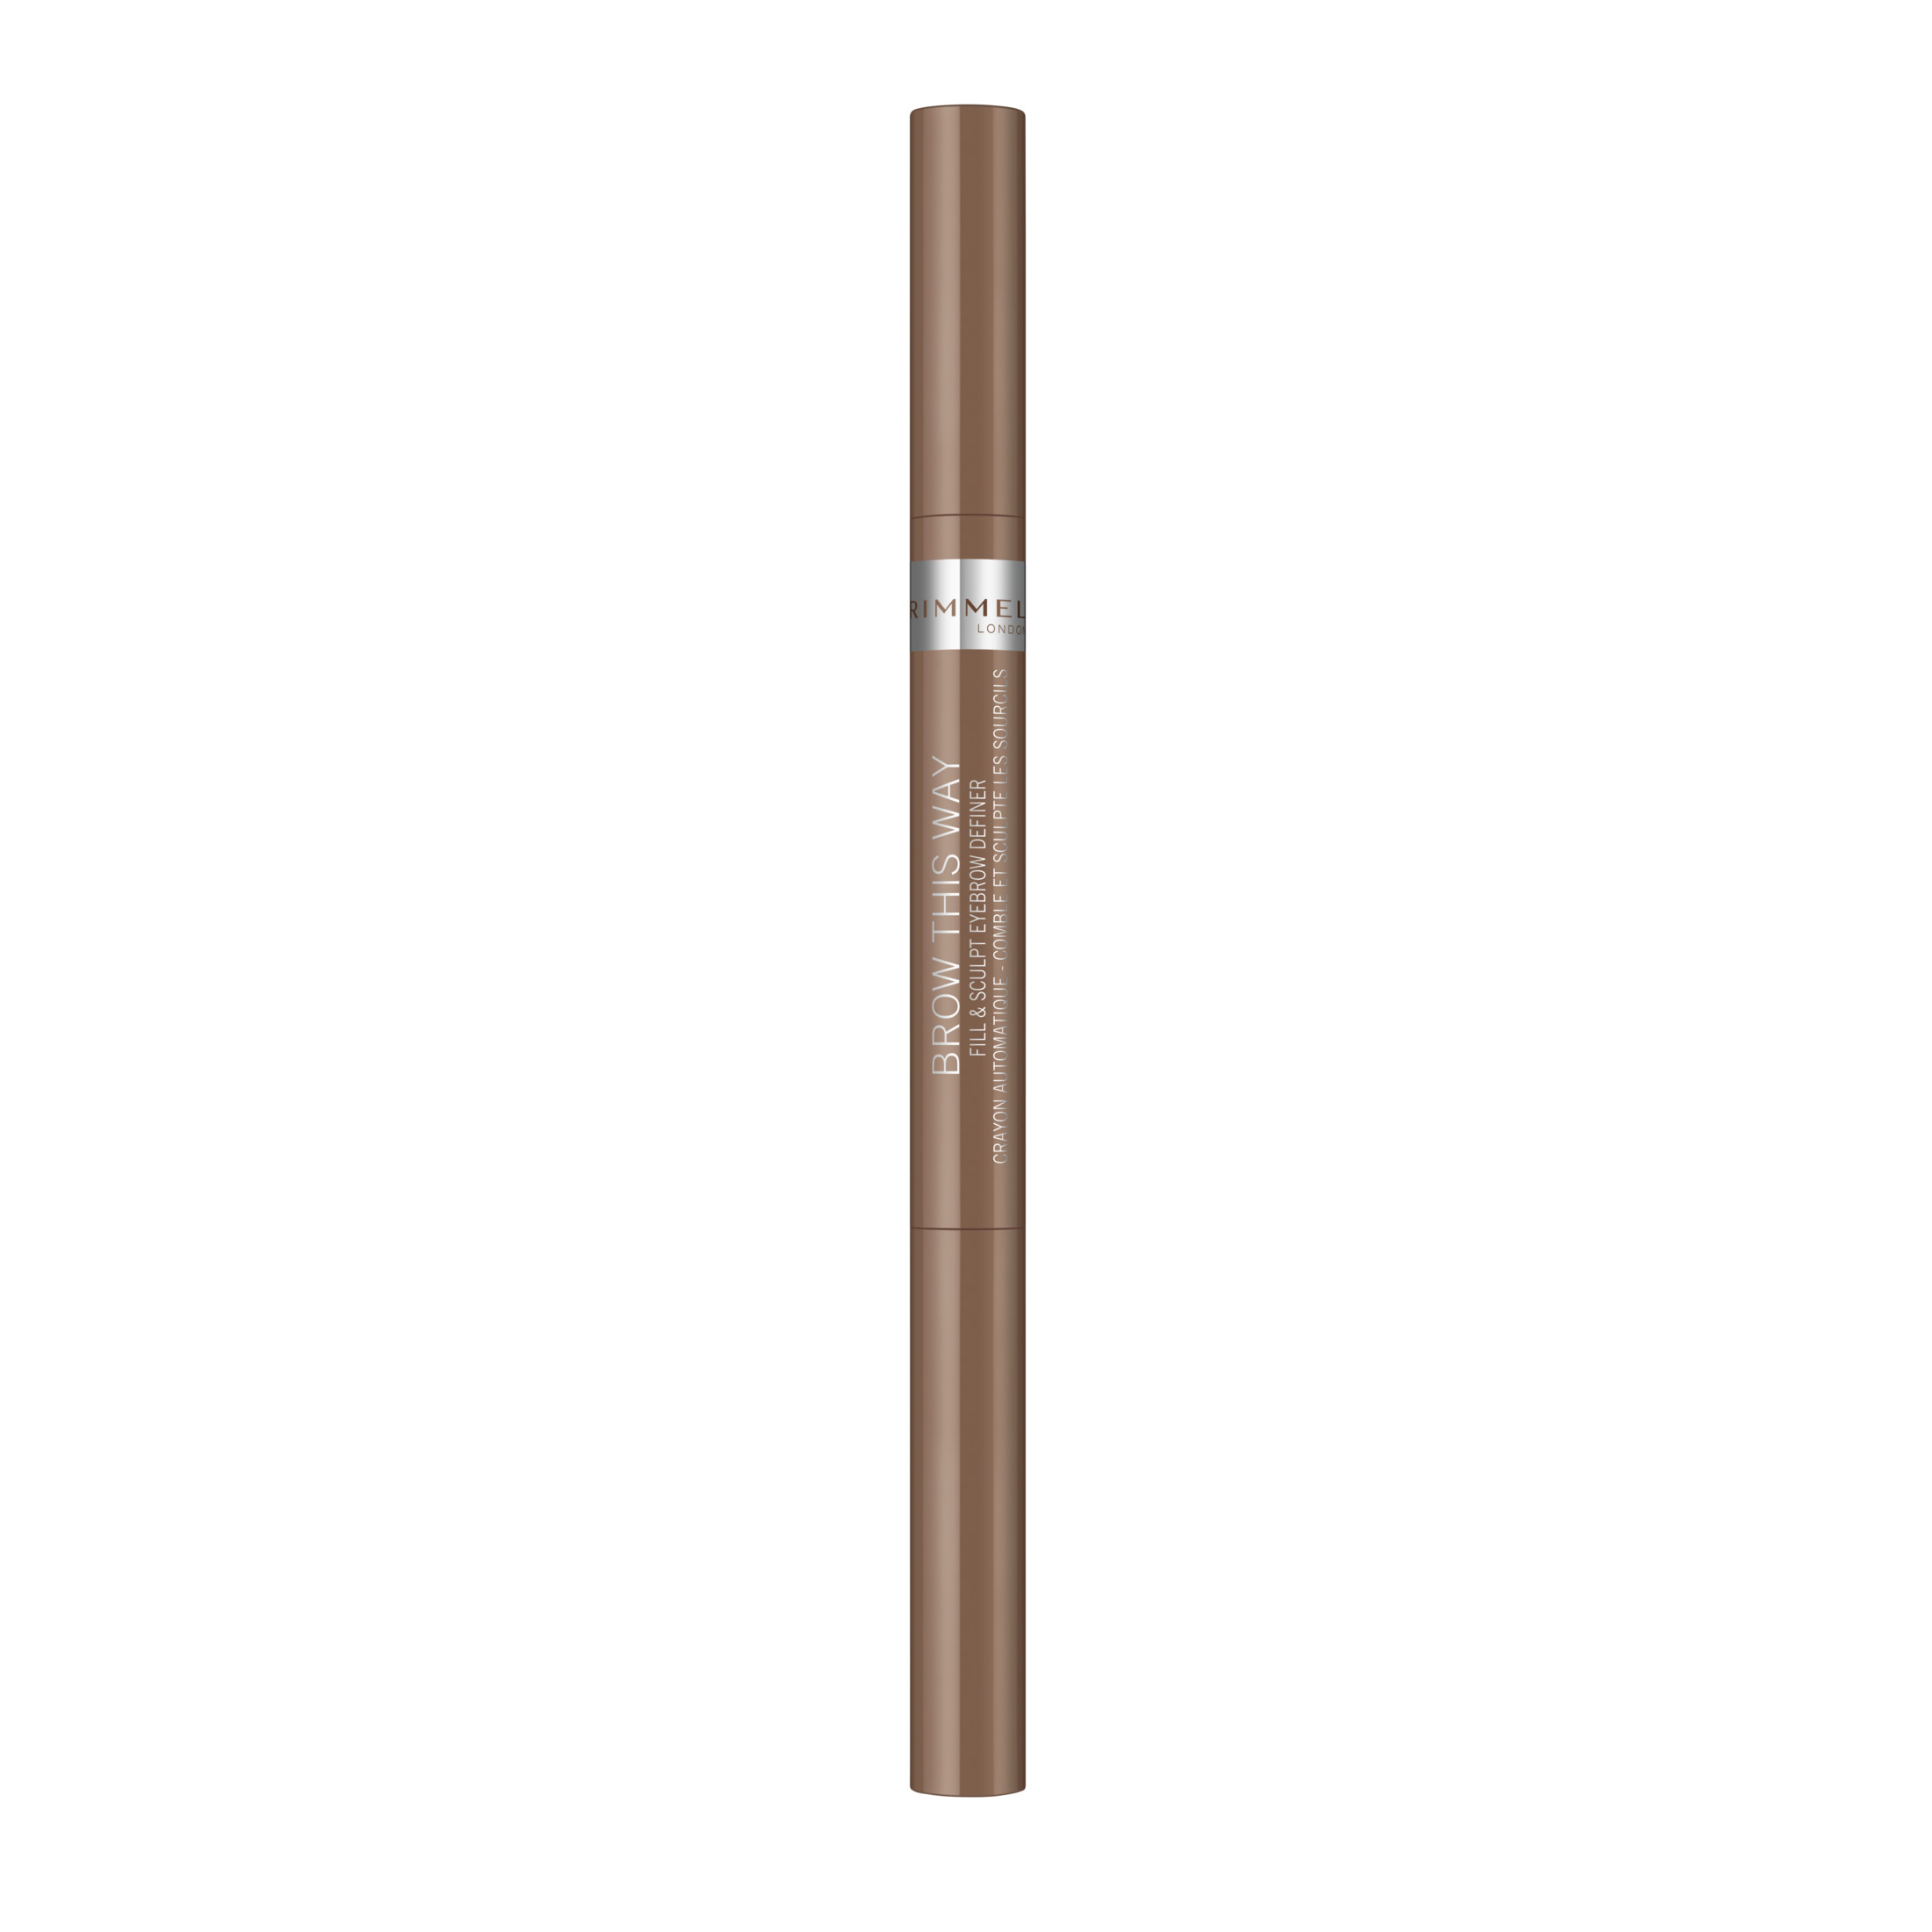 Rimmel London Brow This Way Fill & Sculpt Eyebrow Definer, Blonde, 0.01 oz - image 7 of 7